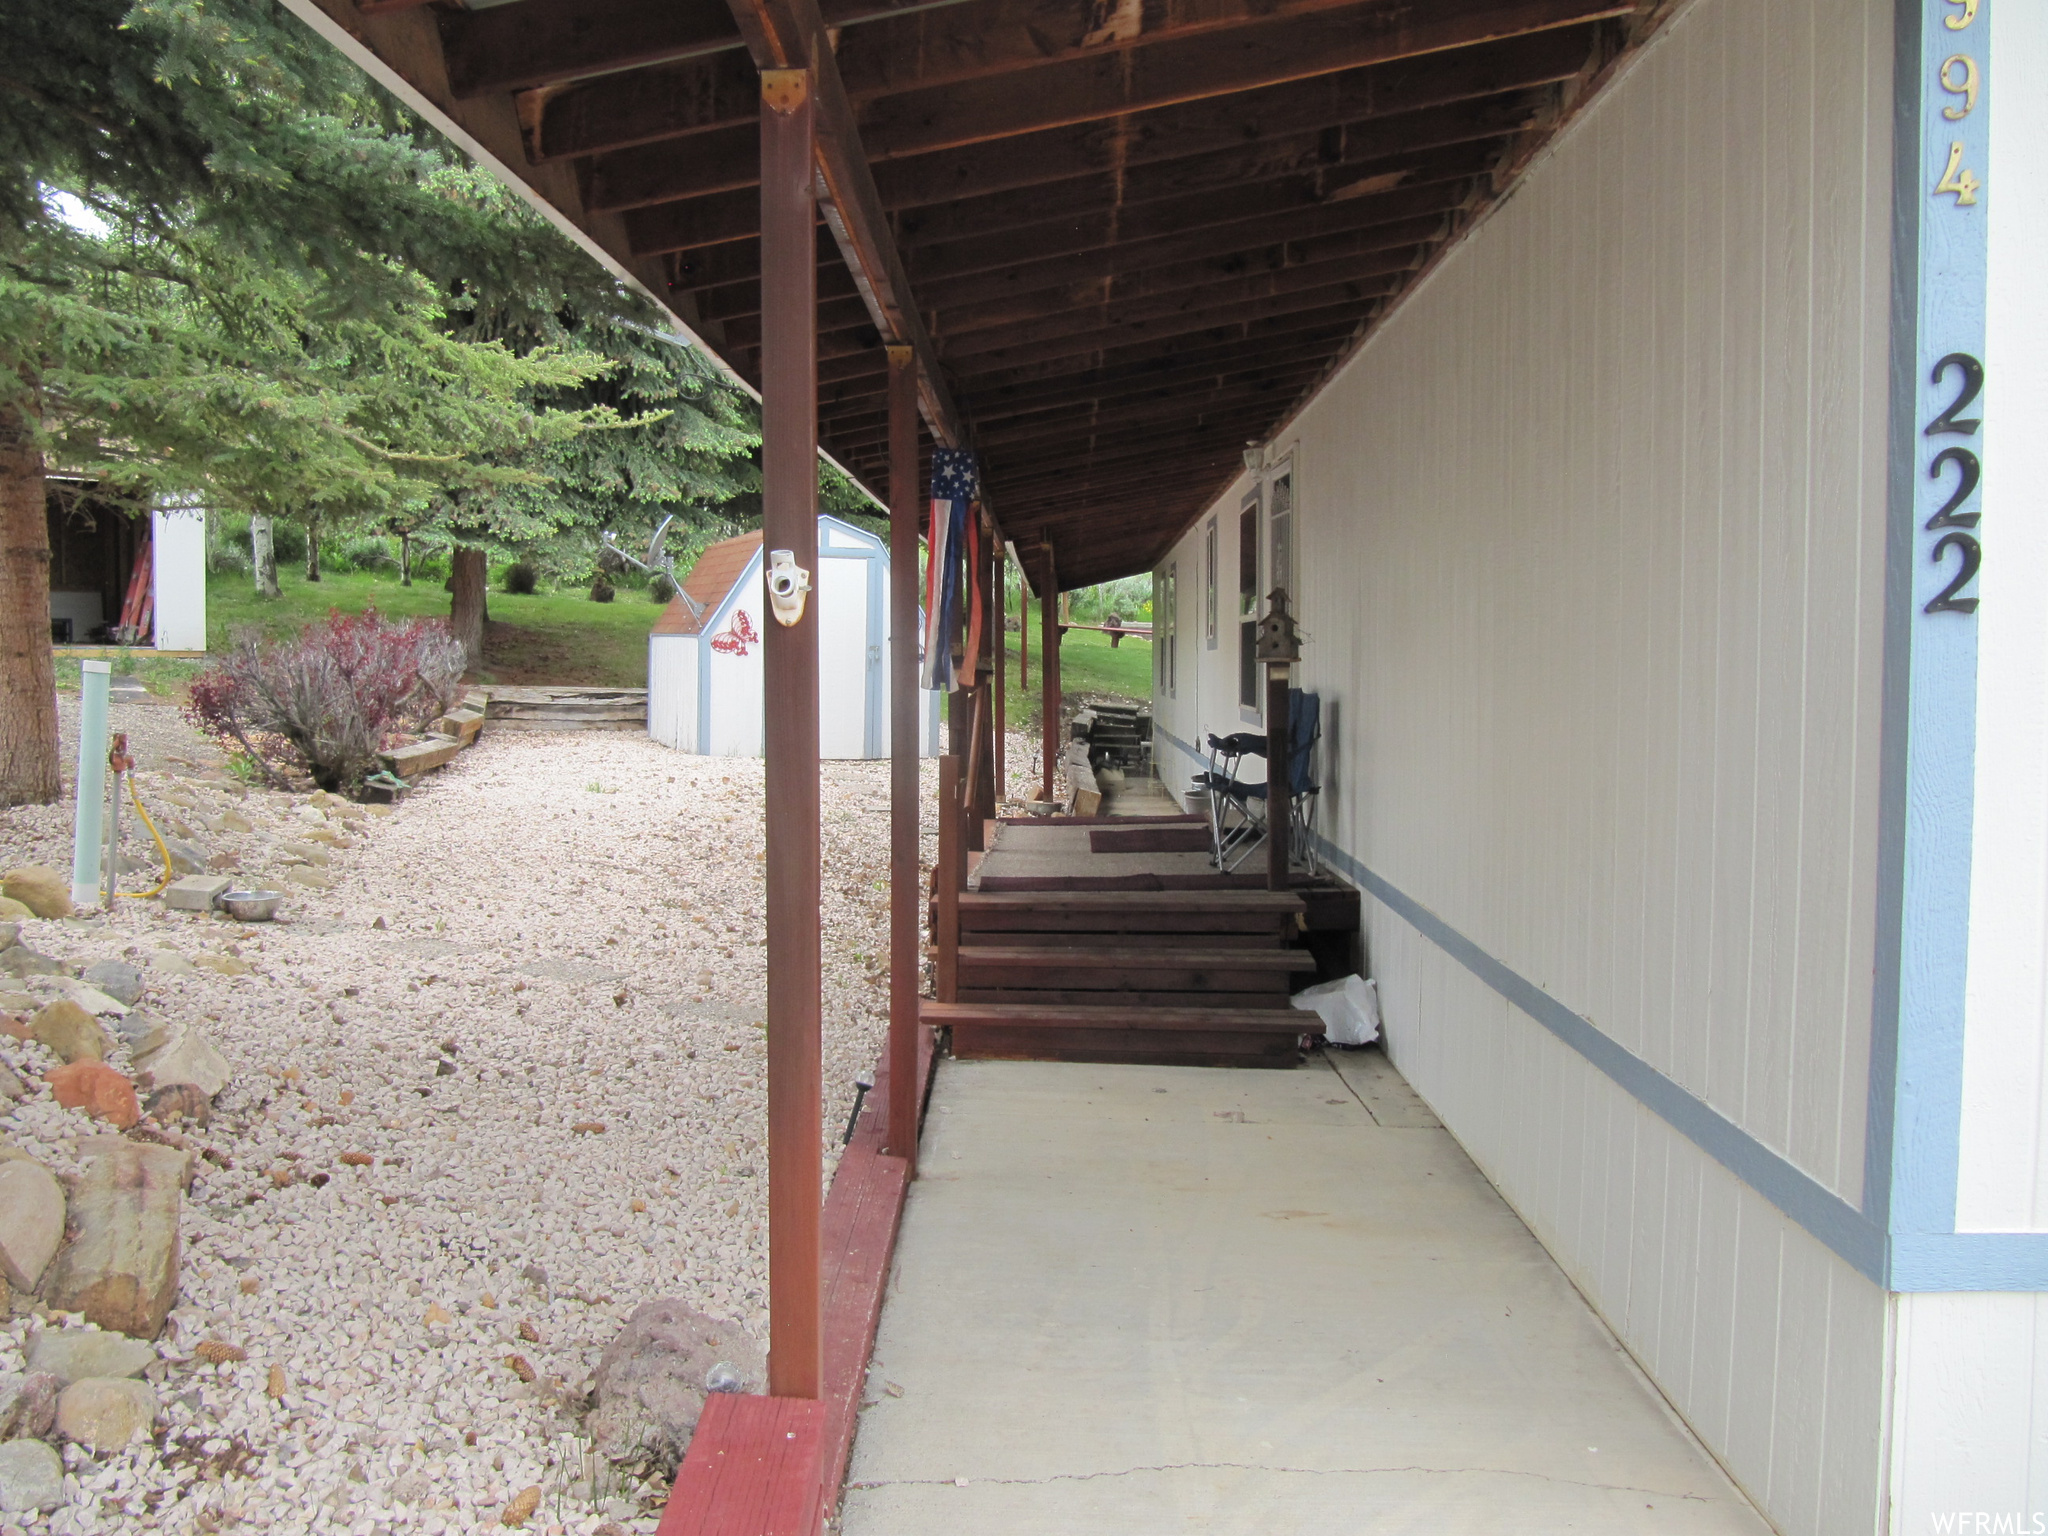 View of deck and side entrance